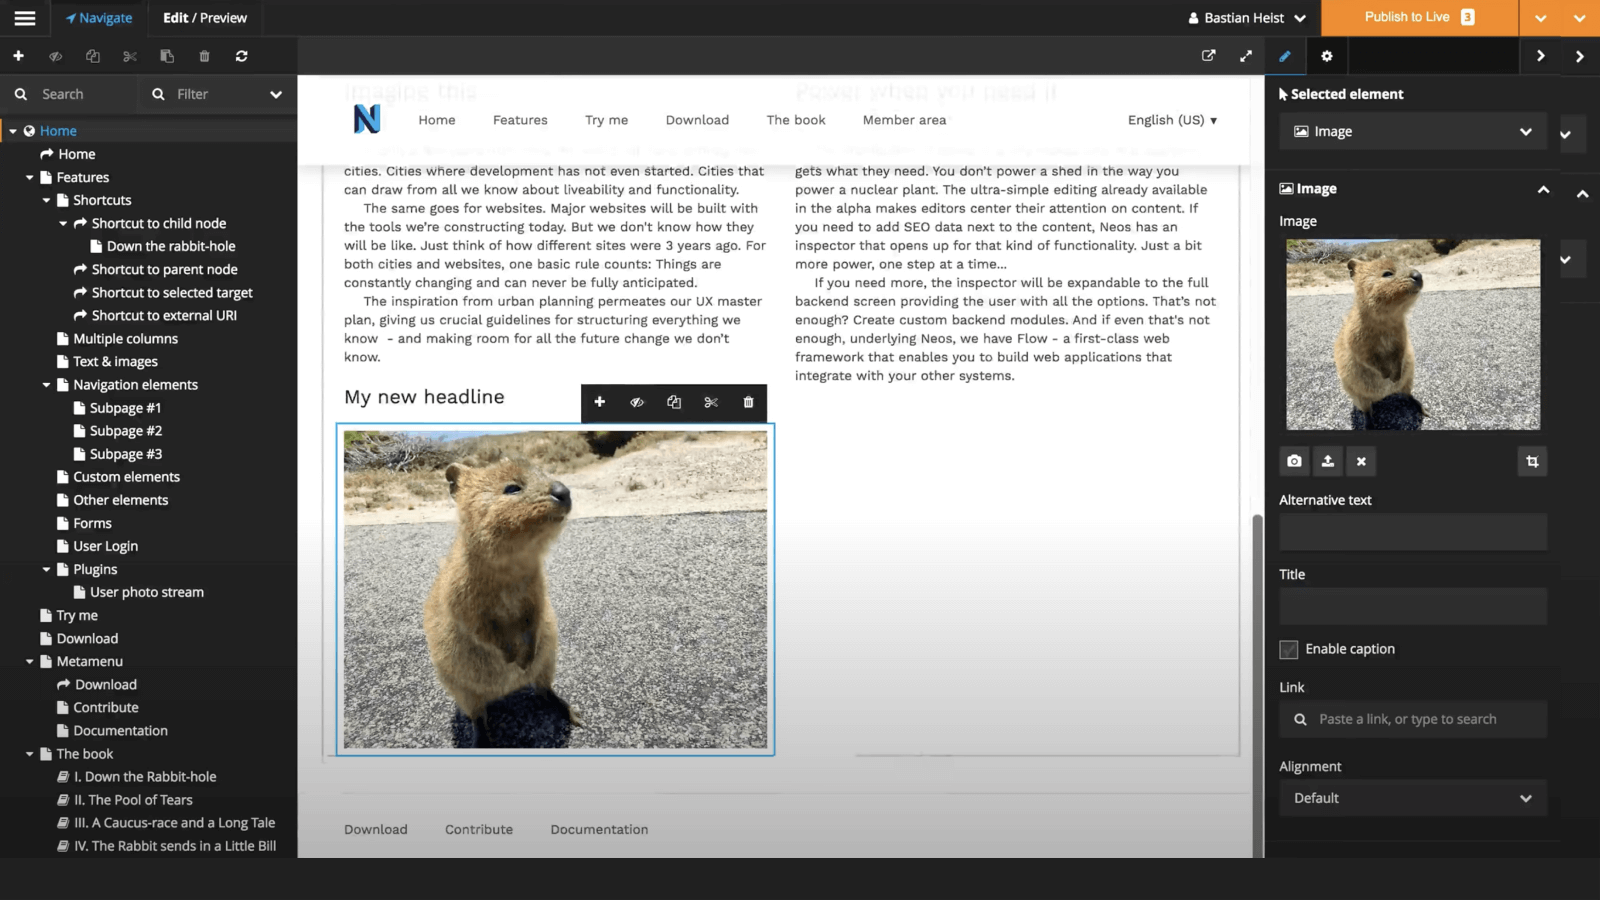 CKEditor 5 provides Neos’ platform with a rich-text editing framework to create custom experiences.